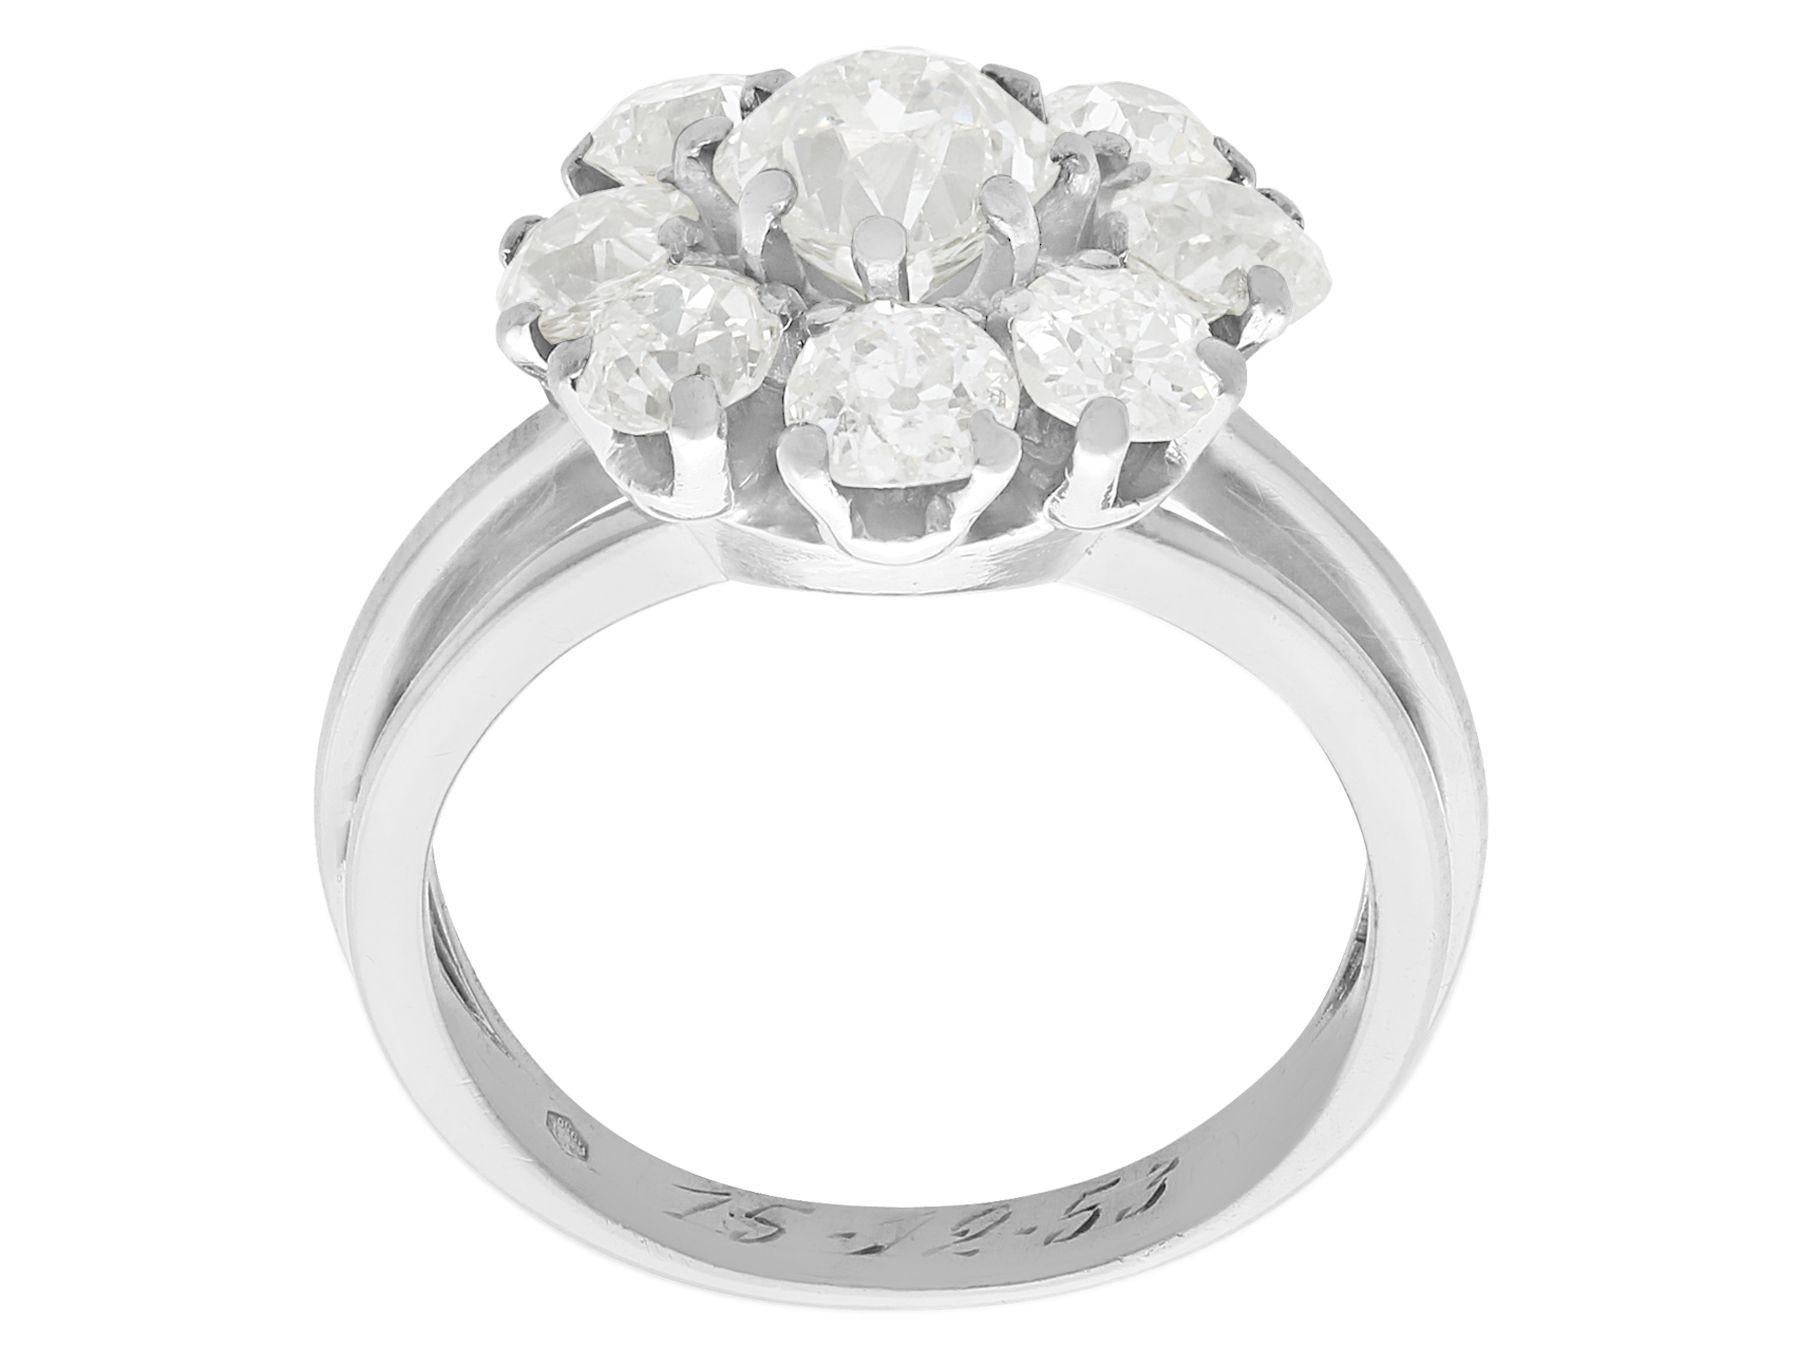 3.05 Carat Diamond and Palladium Engagement Ring In Excellent Condition For Sale In Jesmond, Newcastle Upon Tyne